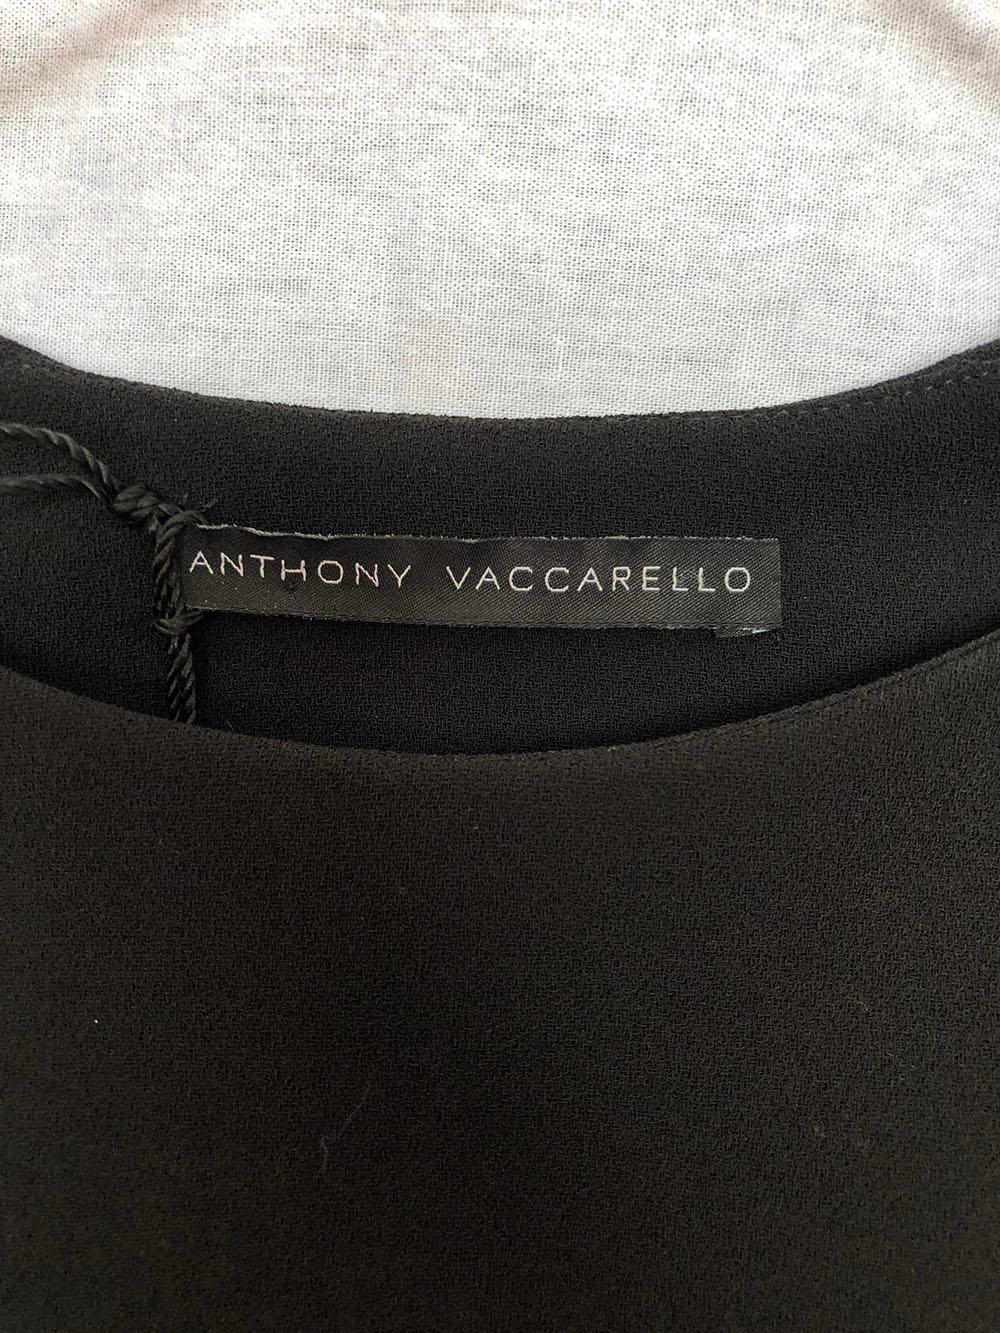 Anthony Vaccarello Black Long Sleeves Crepe Blouse In Excellent Condition For Sale In Thousand Oaks, CA